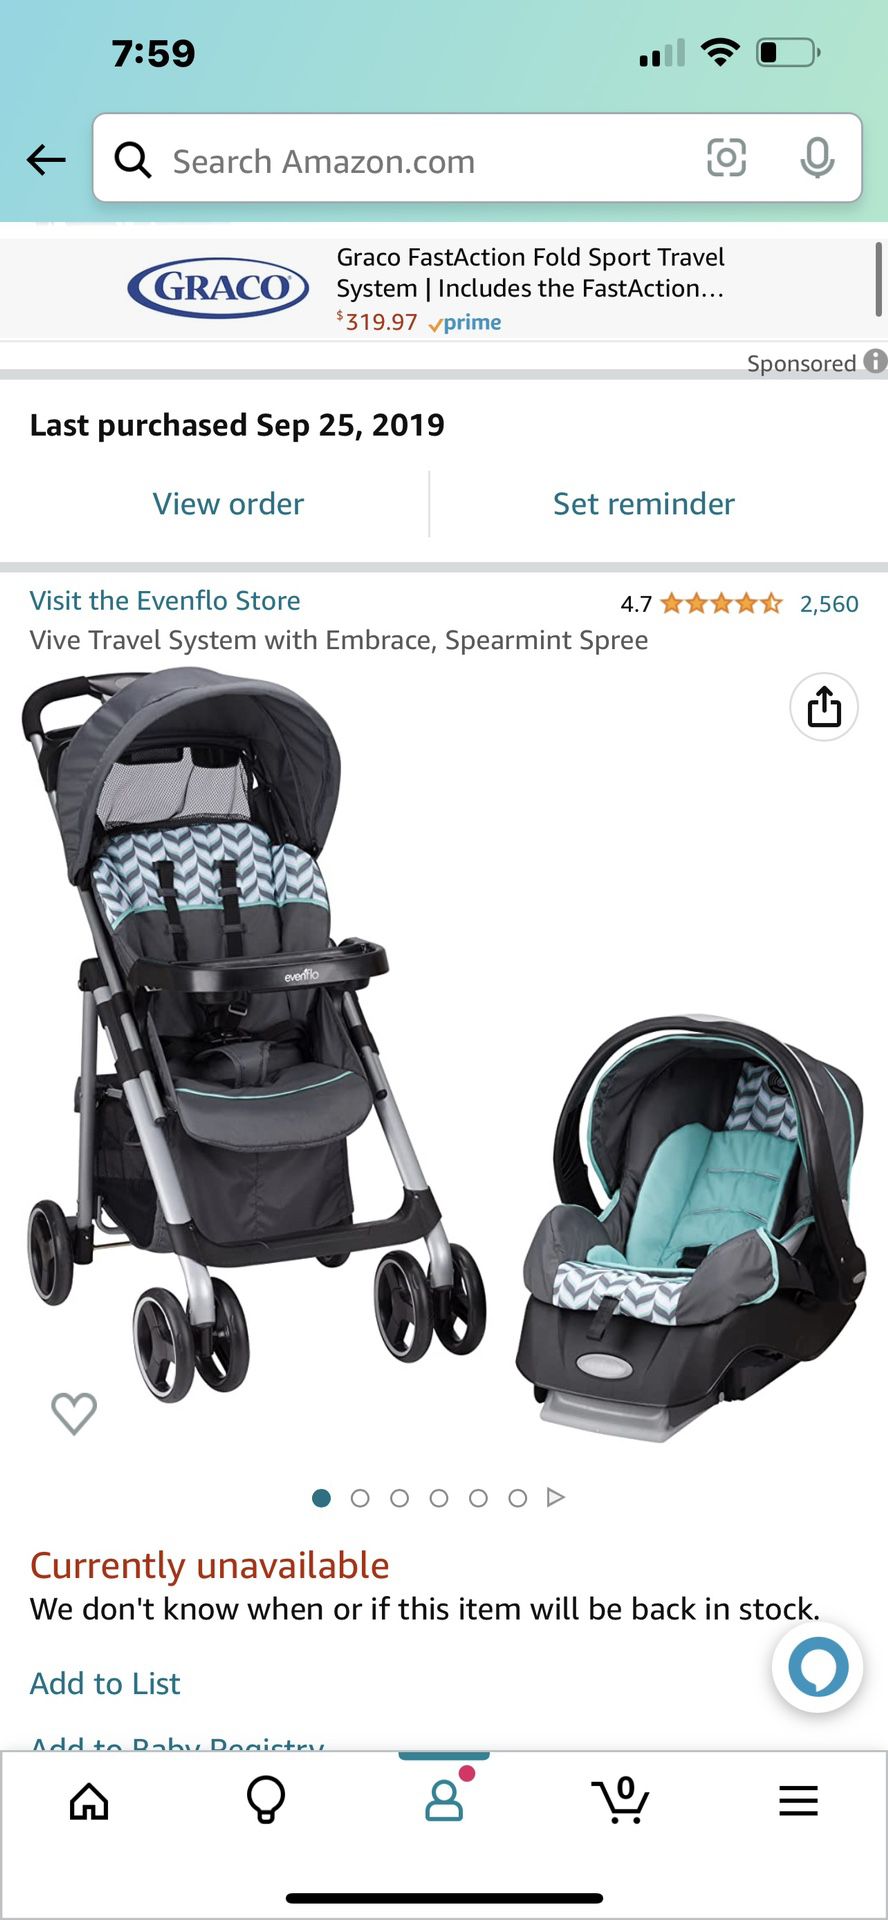 Car seat And Stroller Combo